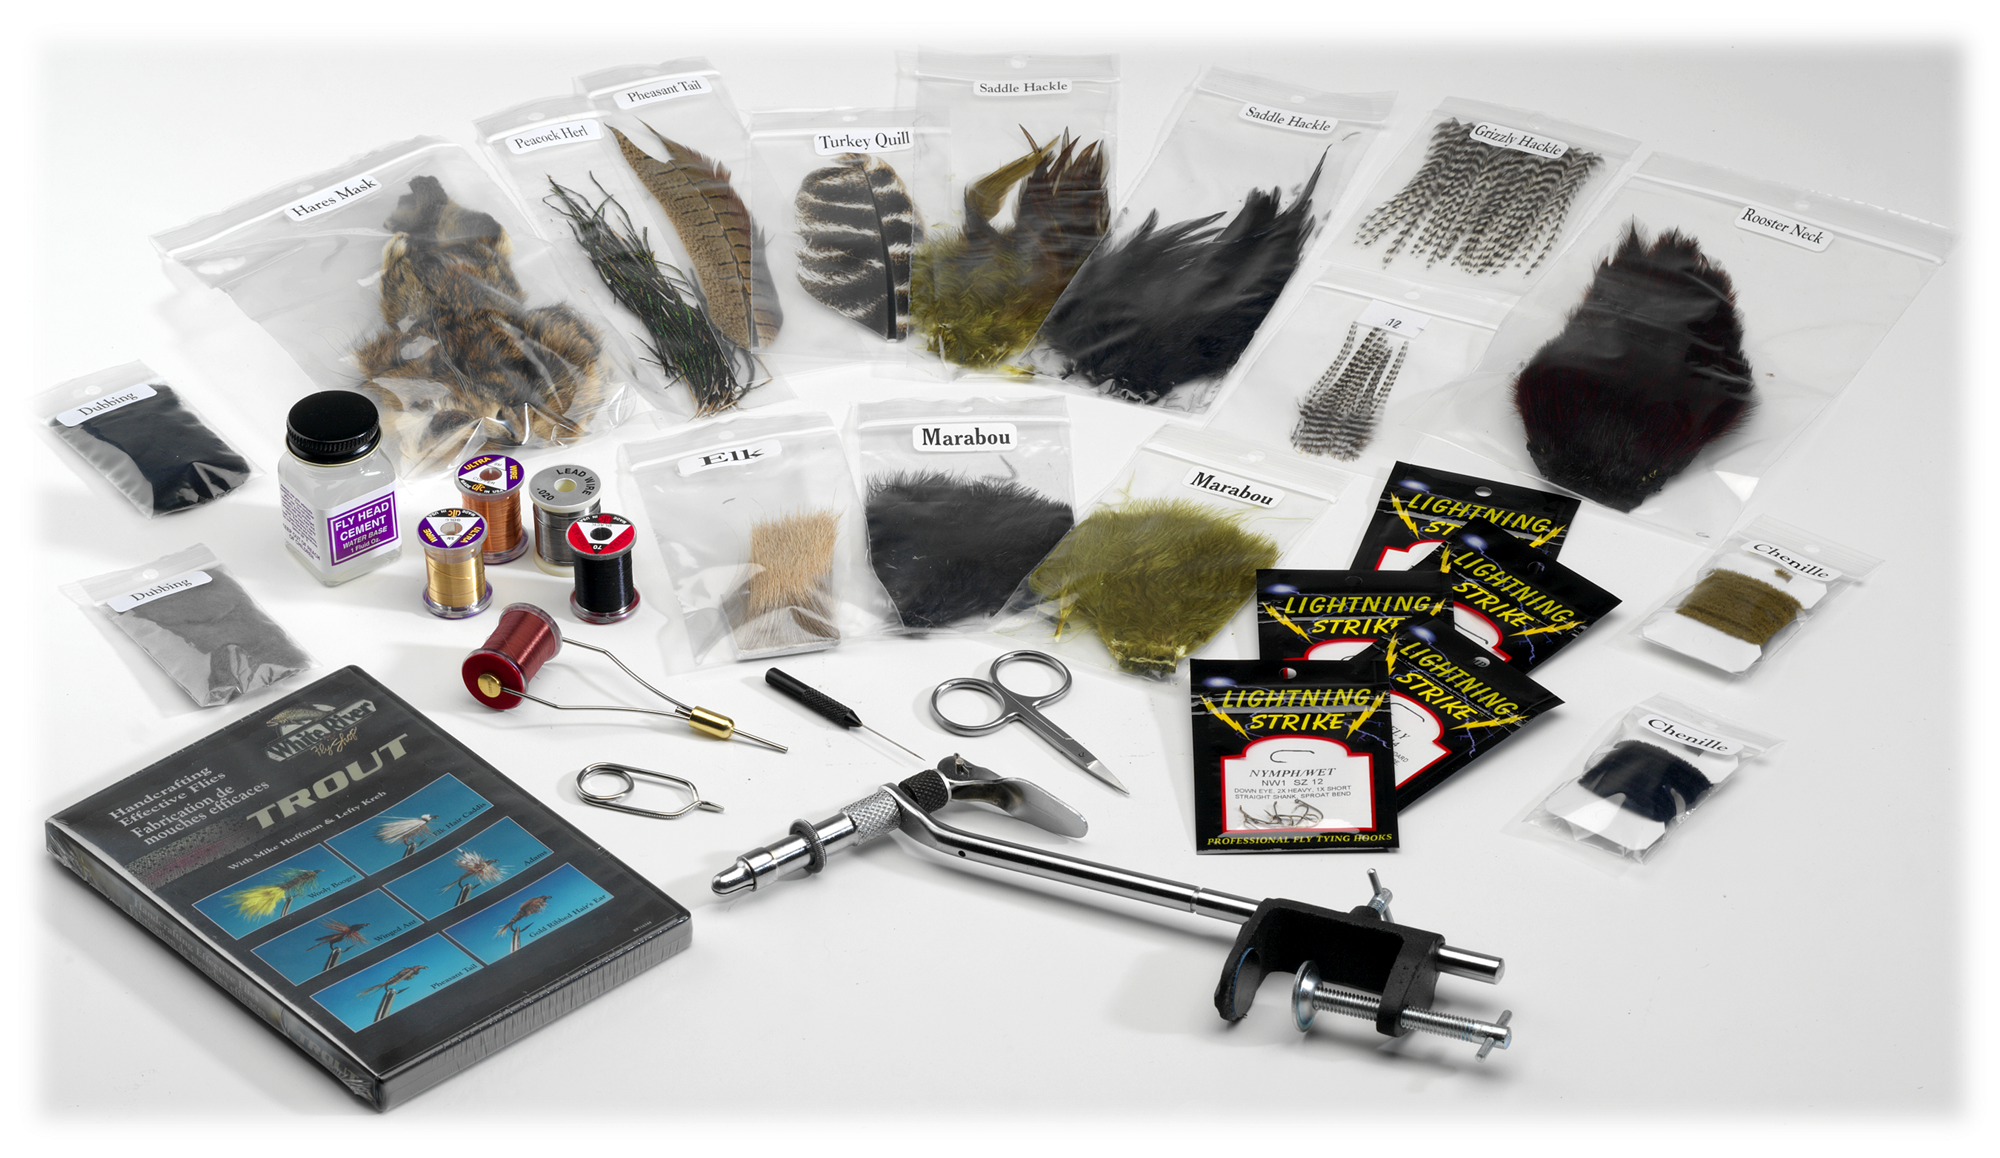 White River Fly Shop Deluxe Fly-Tying Kit with Case